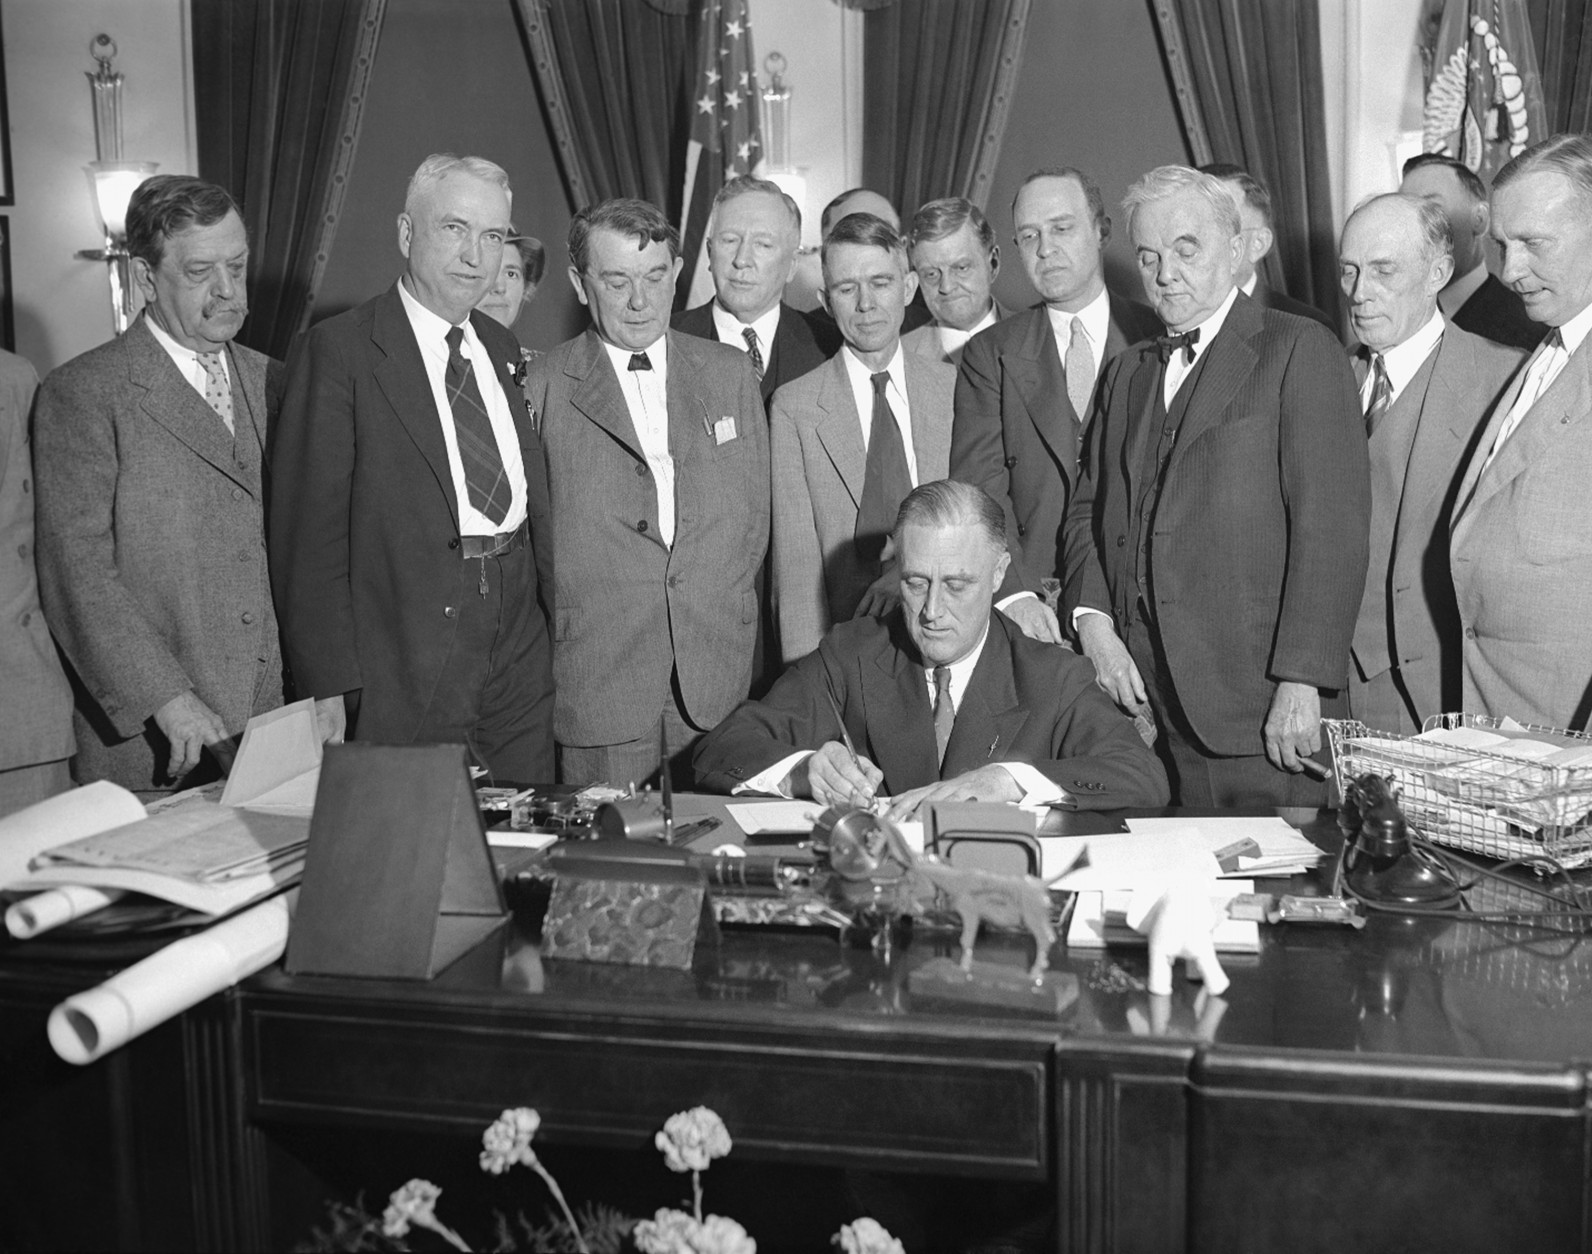 President Franklin D. Roosevelt signs the Norris-Hill Bill to develop the Tennessee Valley, May 18, 1933.  From left:  Sen. Ellison D. Smith of South Carolina; Rep. John J. McSwain of South Carolina; Sen. Kenneth D. McKellar of Tennessee; Rep. Samuel Davis McReynolds of Tennessee; Reps. Miles C. Allgood, William Bacon Oliver and Lister Hill, all of Alabama; Sen. George William Norris of Nebraska; and looking over his shoulder is Rep. Edward B. Almon, whose district is Muscle Shoals.  (AP Photo)